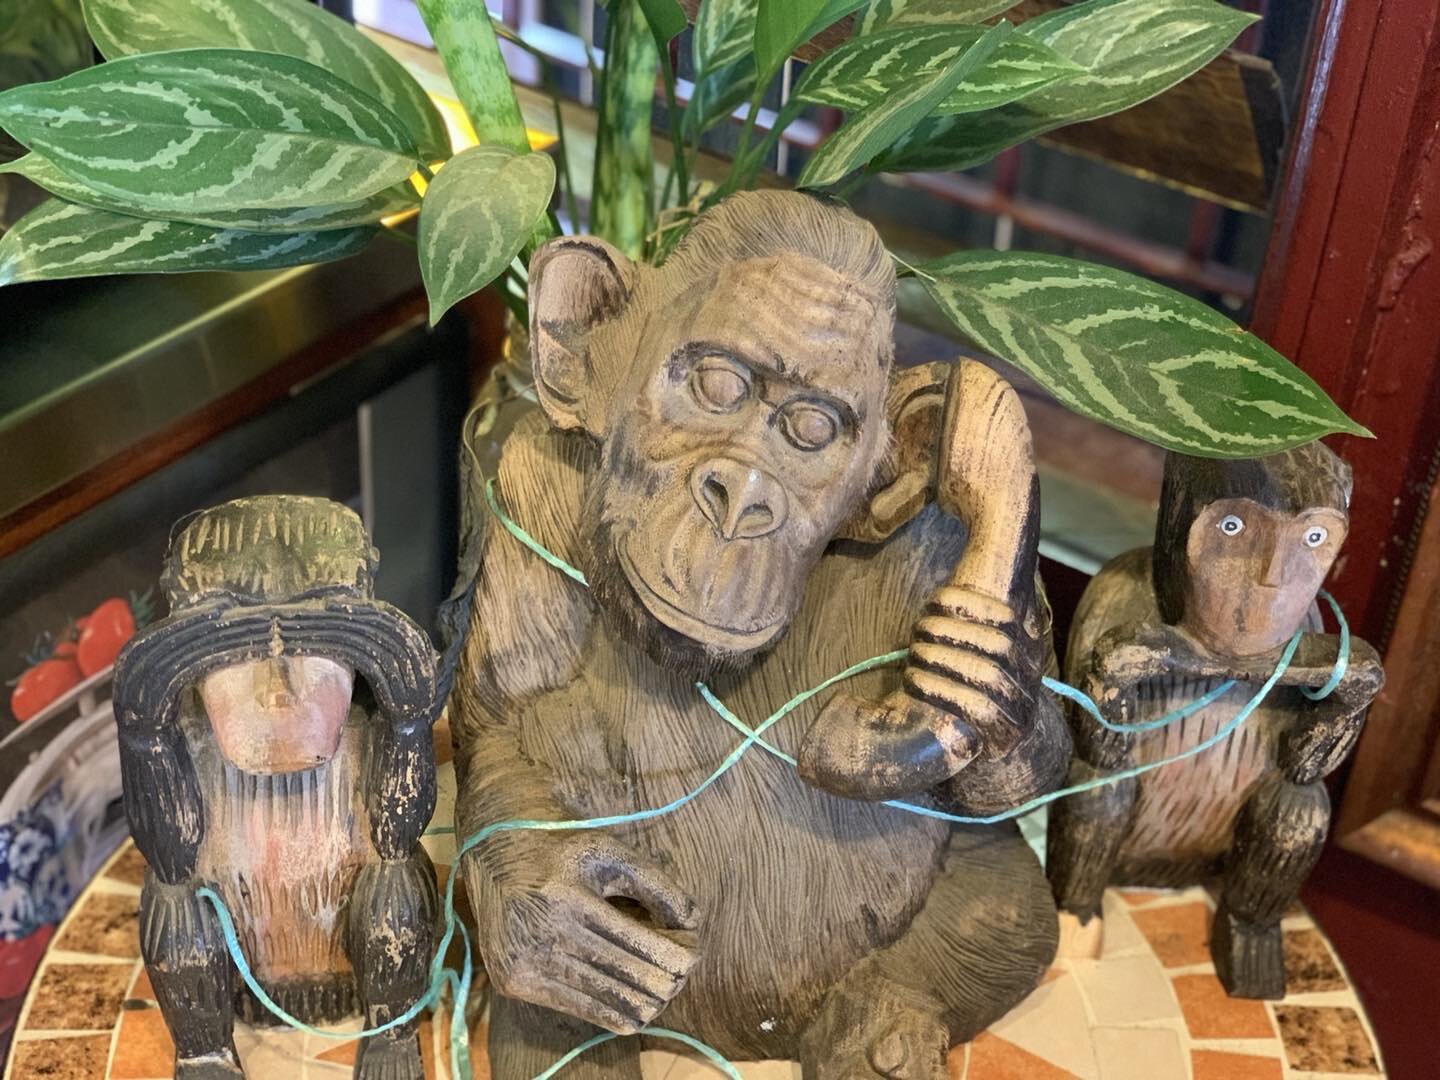 Time travel is real. Just found an unchanged three monkeys cafe in west end. Sat down with my twenty year old self and told her everything is going to be fine.